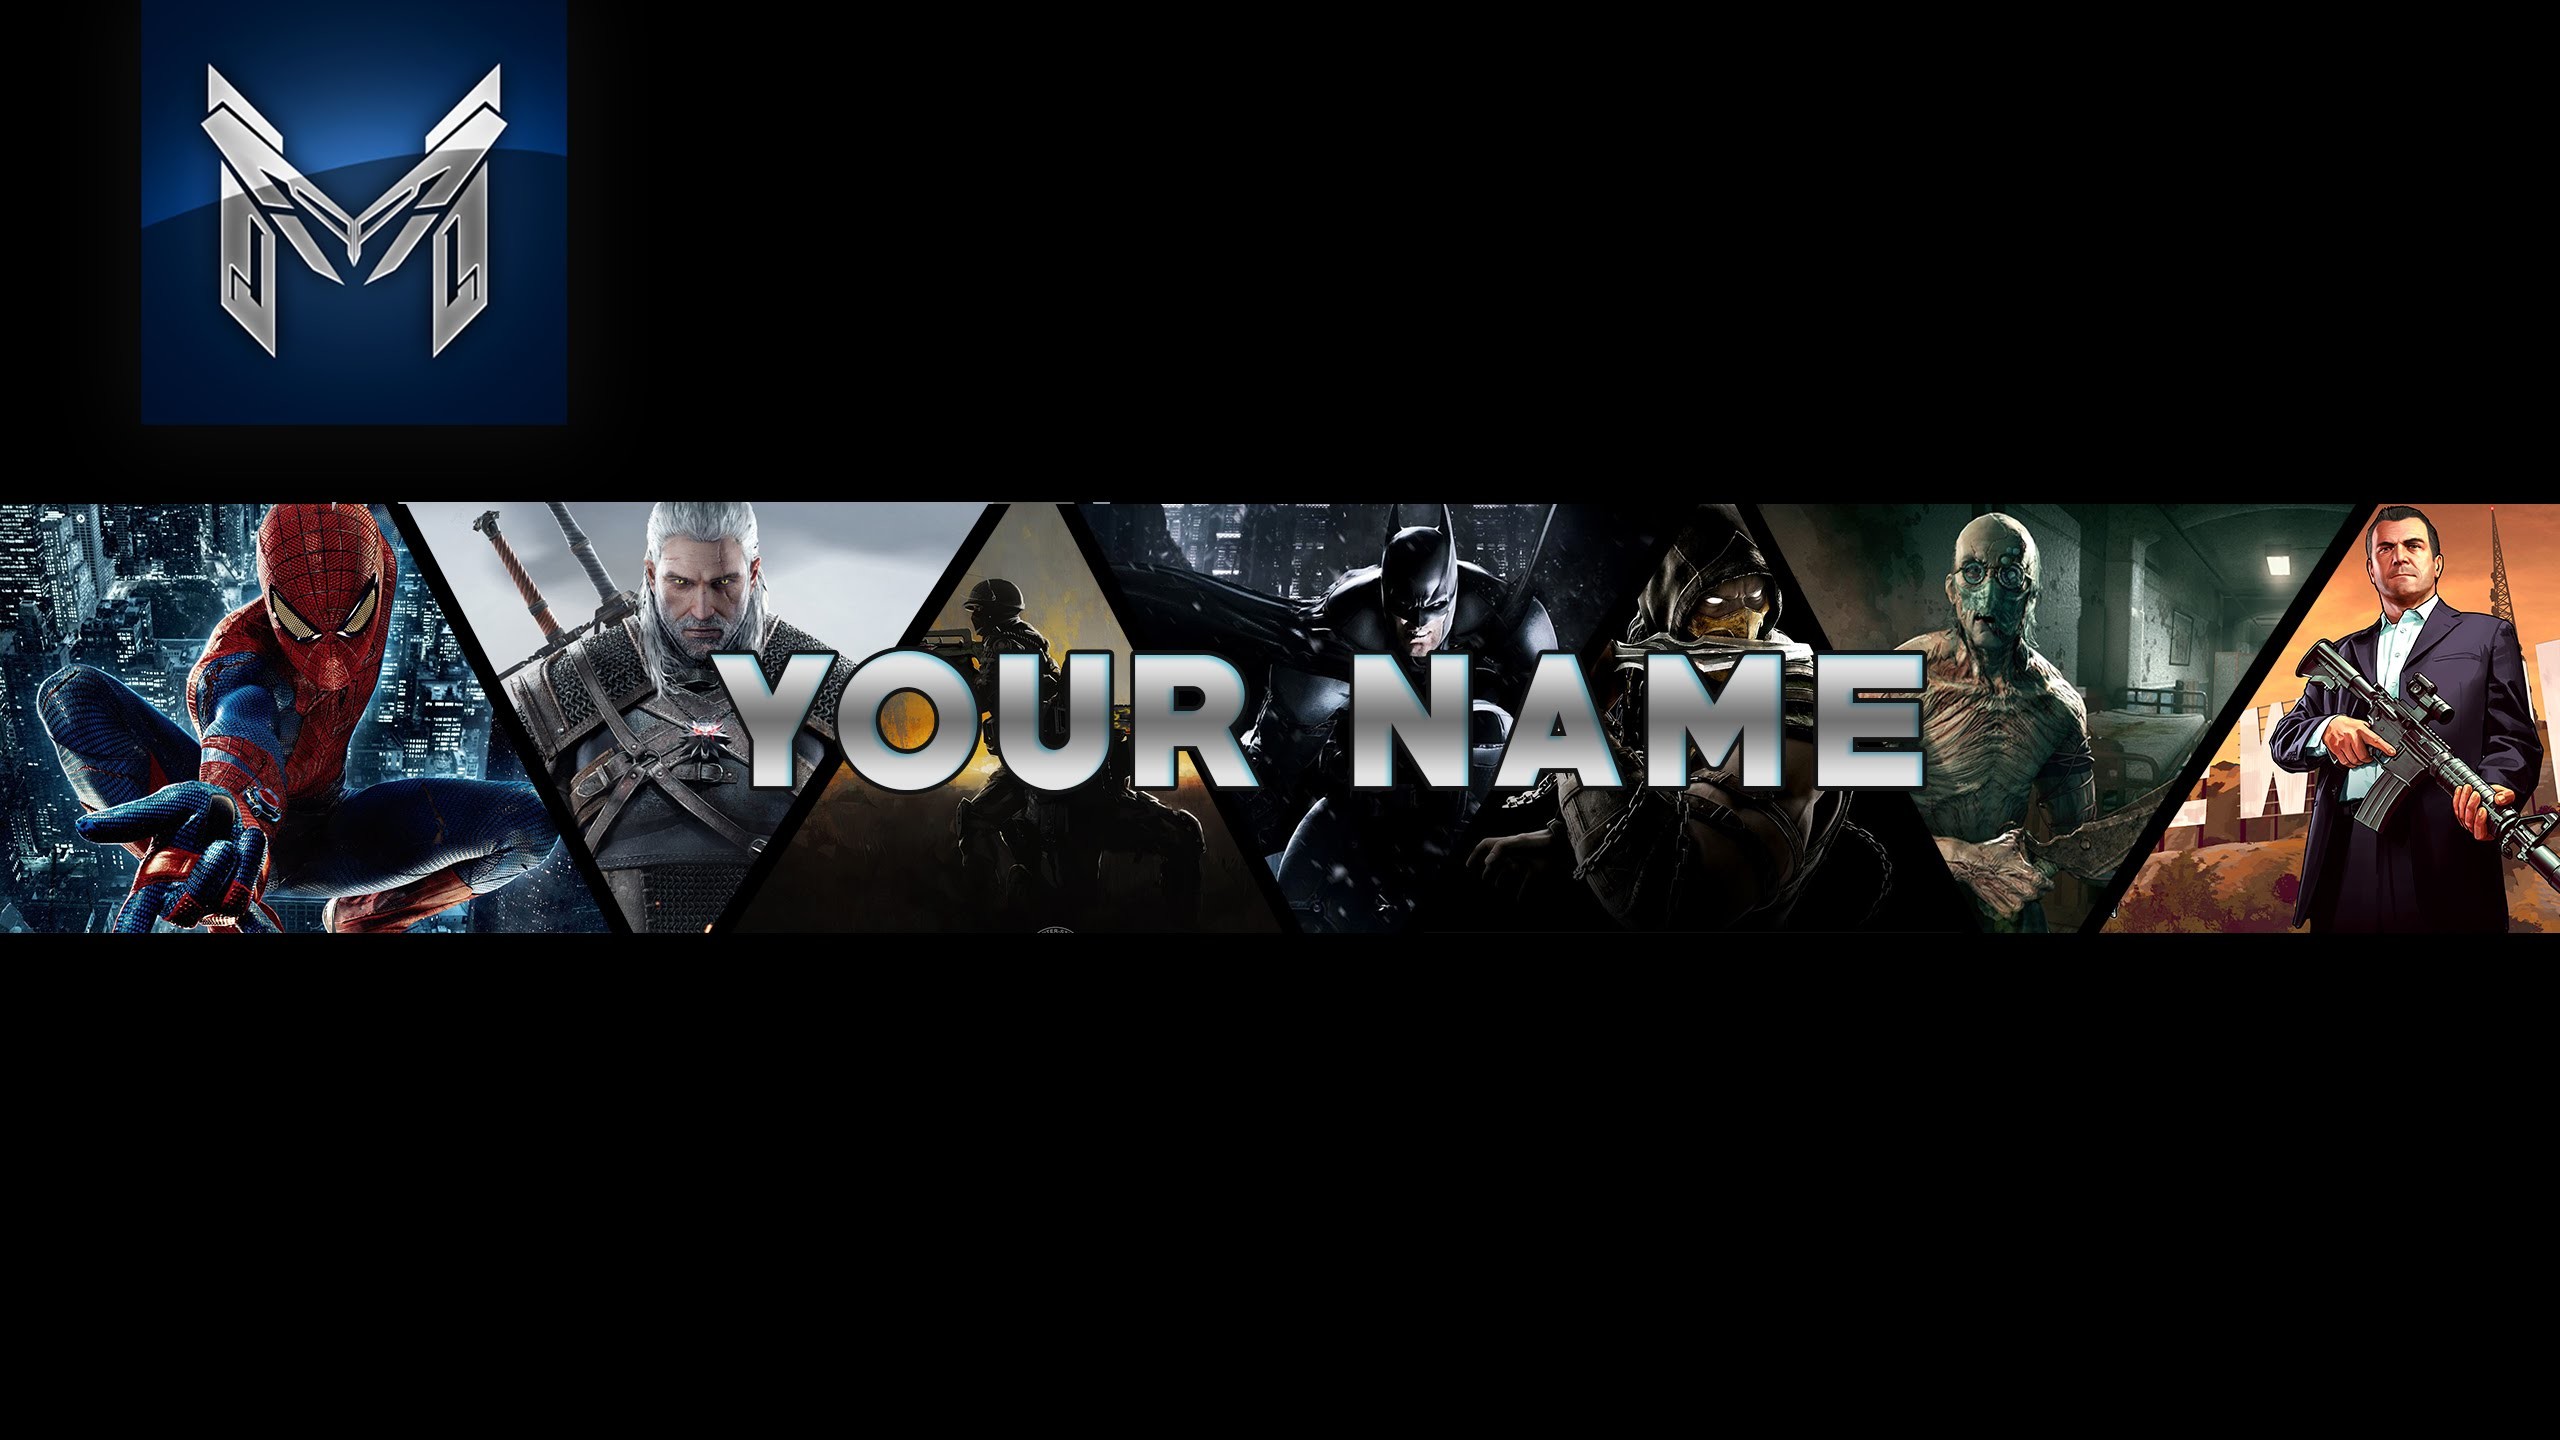 2560x1440 Gaming Youtube banner Template | Free Downland | Speed Art (Photoshop CS6)  - YouTube